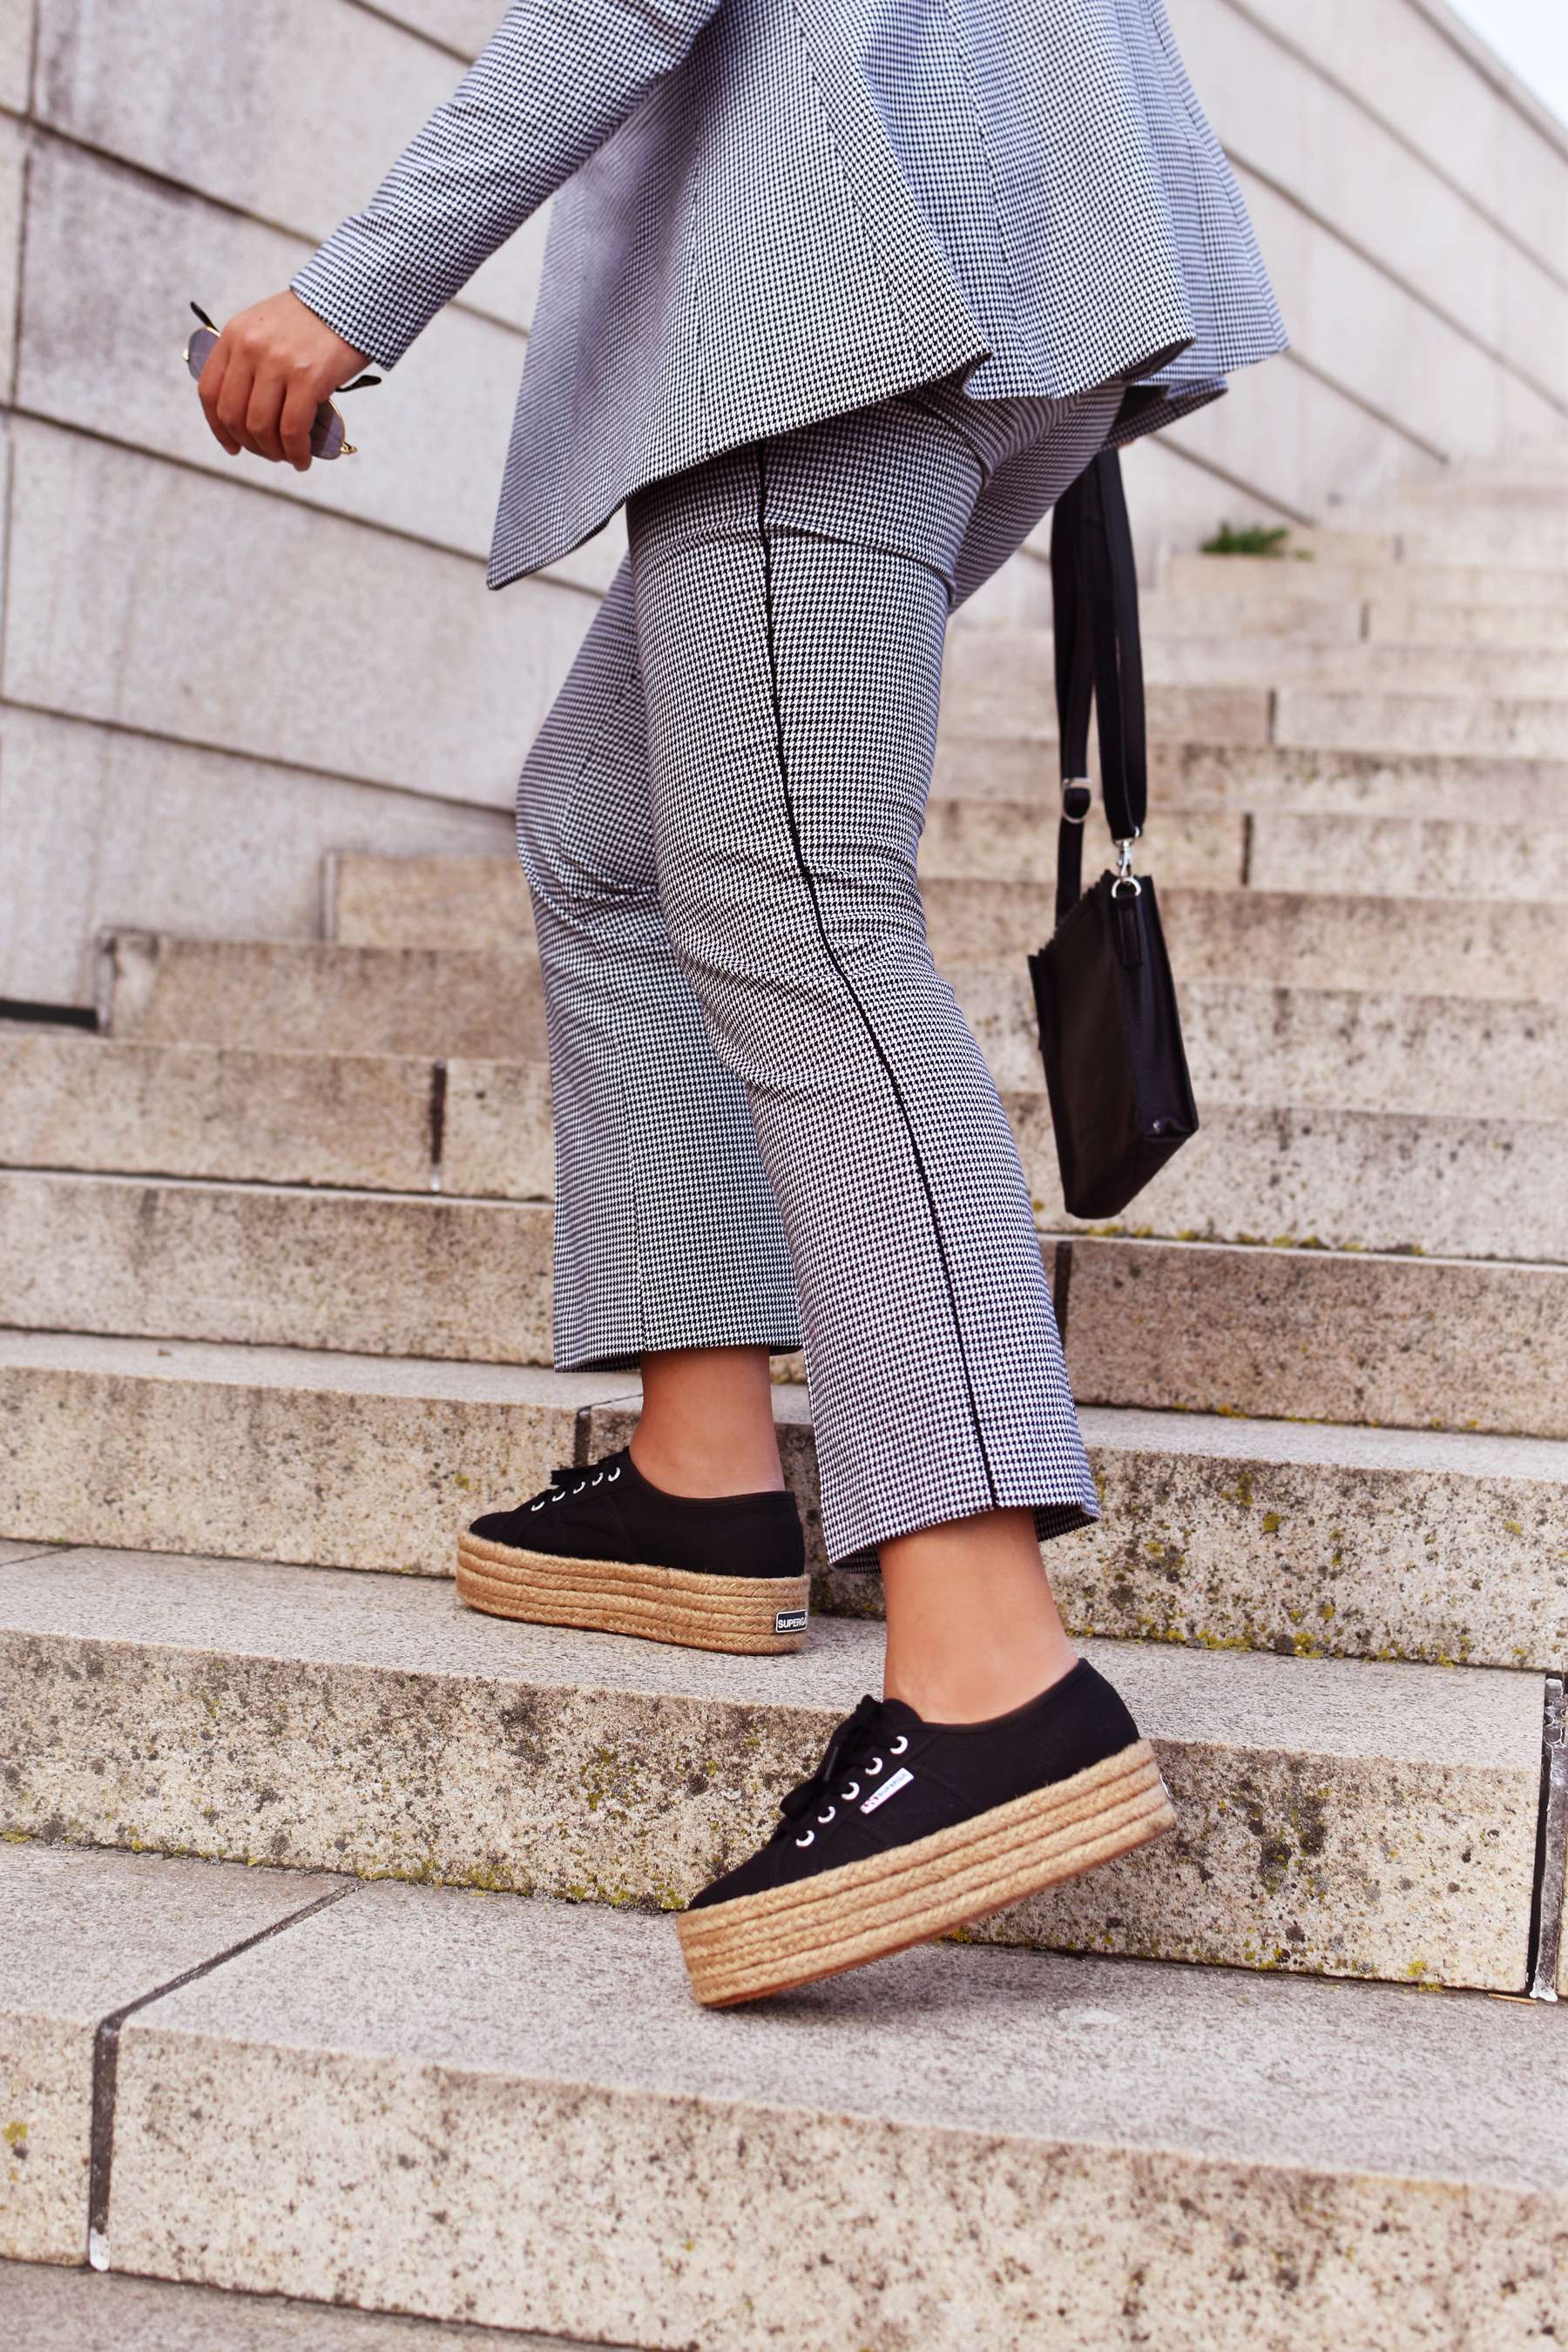 superga platform sneakers outfit